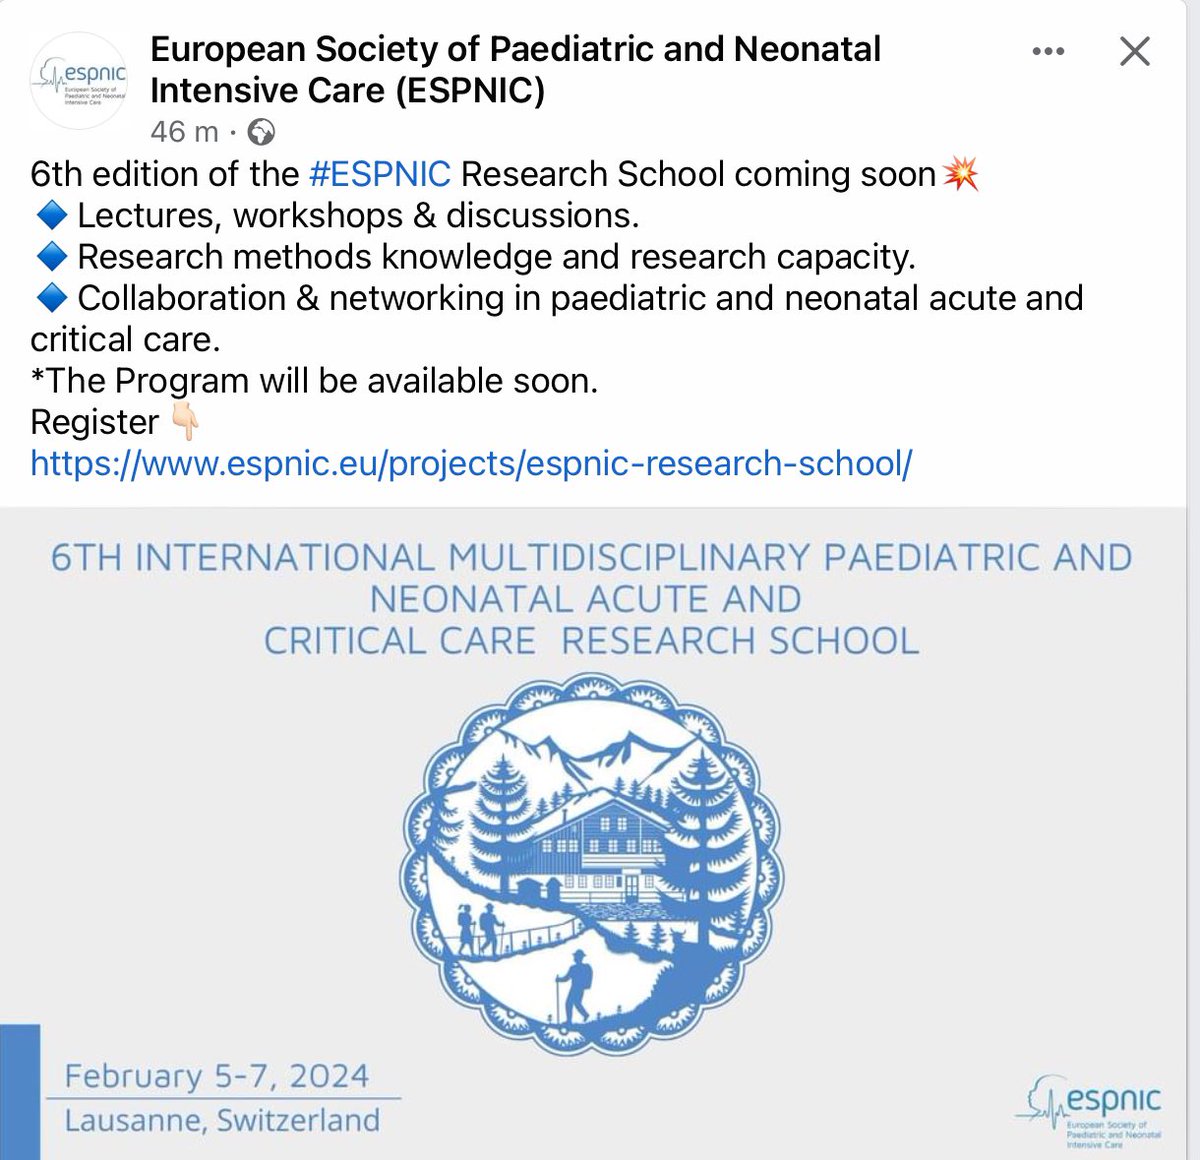 Want to learn more about research methods and network with other healthcare professionals? Then join us in Lausanne @PICSociety @PICSTAR2022 @ACCCNAUST @BACCNUK @NeoResearch_Net @JosLatour1 @josephcmanning @aakashdeeparora @PostPICU_PALISI @niccjournal @DrCBattersby